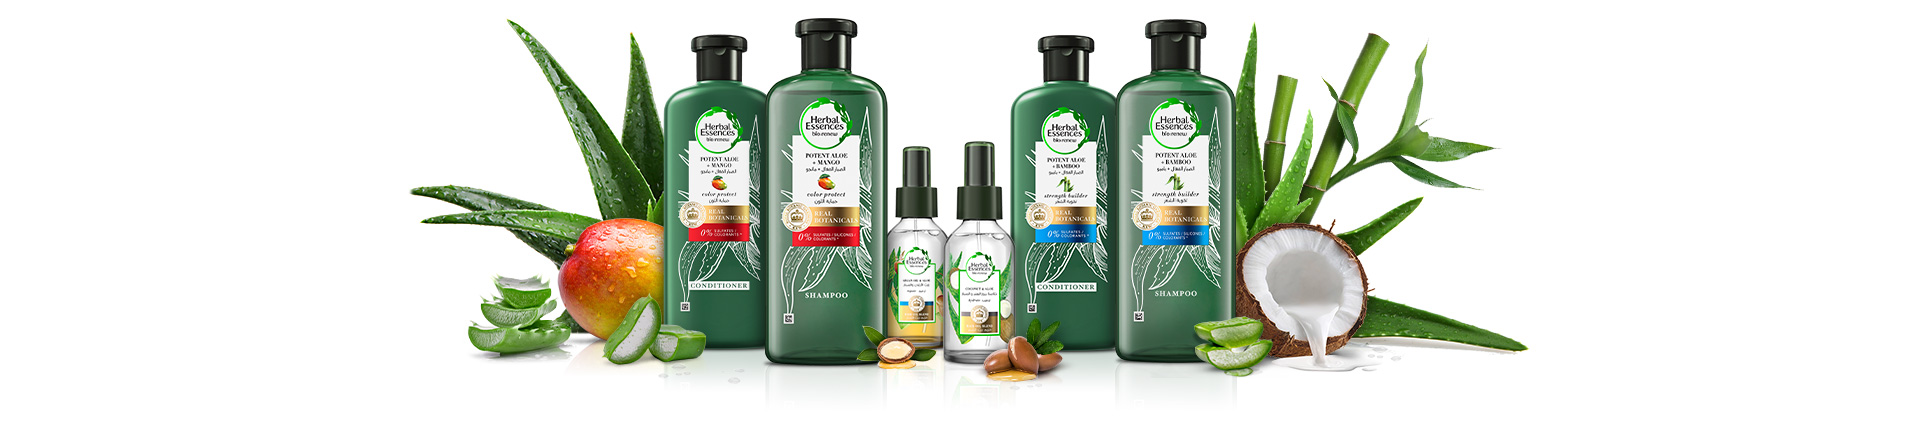 Herbal Essences Potent Aloe collection shampoo, conditioners and Oil 